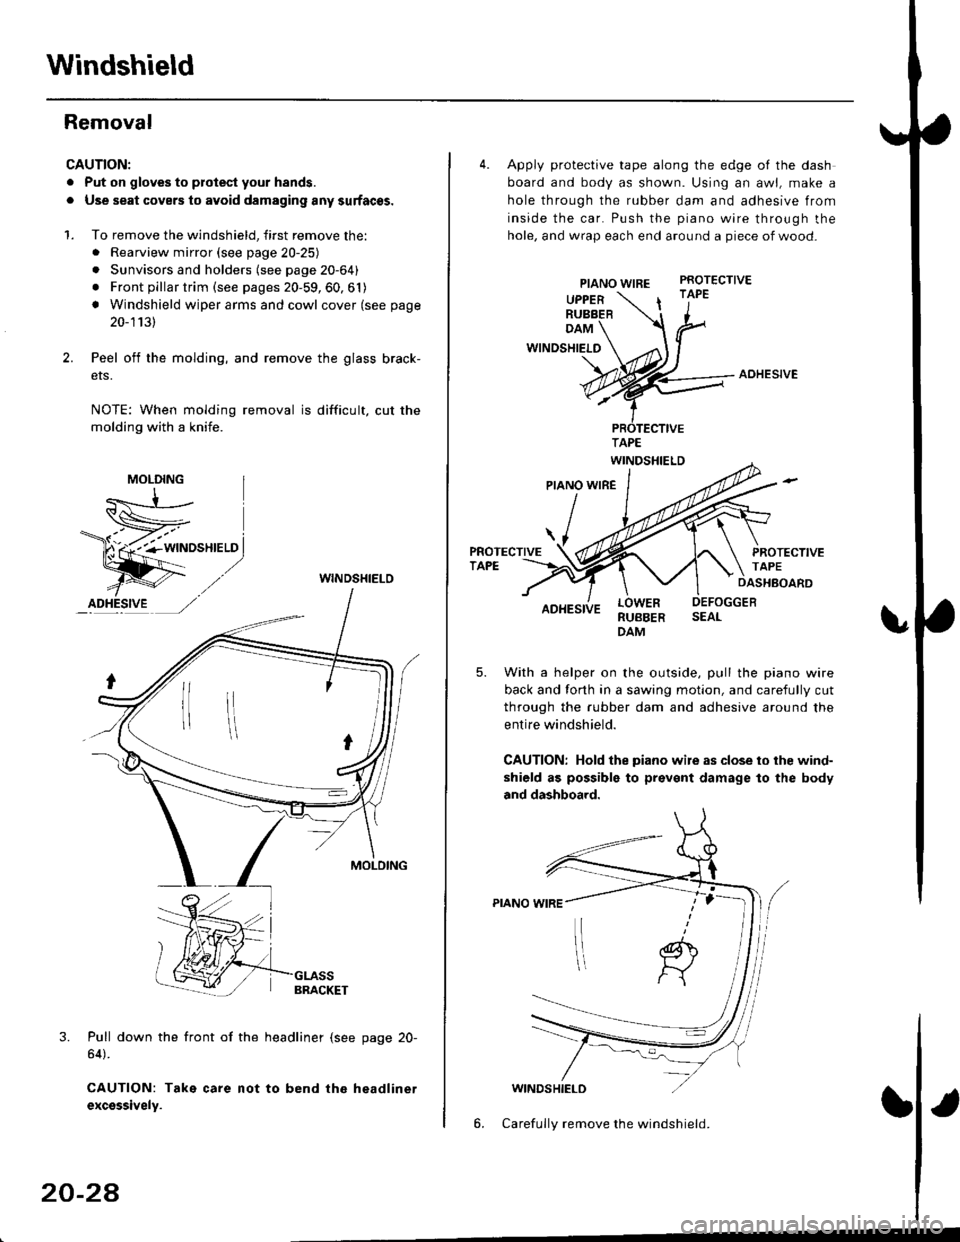 HONDA CIVIC 1996 6.G Workshop Manual Windshield
Removal
CAUTION:
. Put on gloves to plotest your h8nds.
. Use seat covers to avoid damaging any surfaces.
1. To remove the windshield, first remove the:. Rearview mirror (see page 20-25)
. 